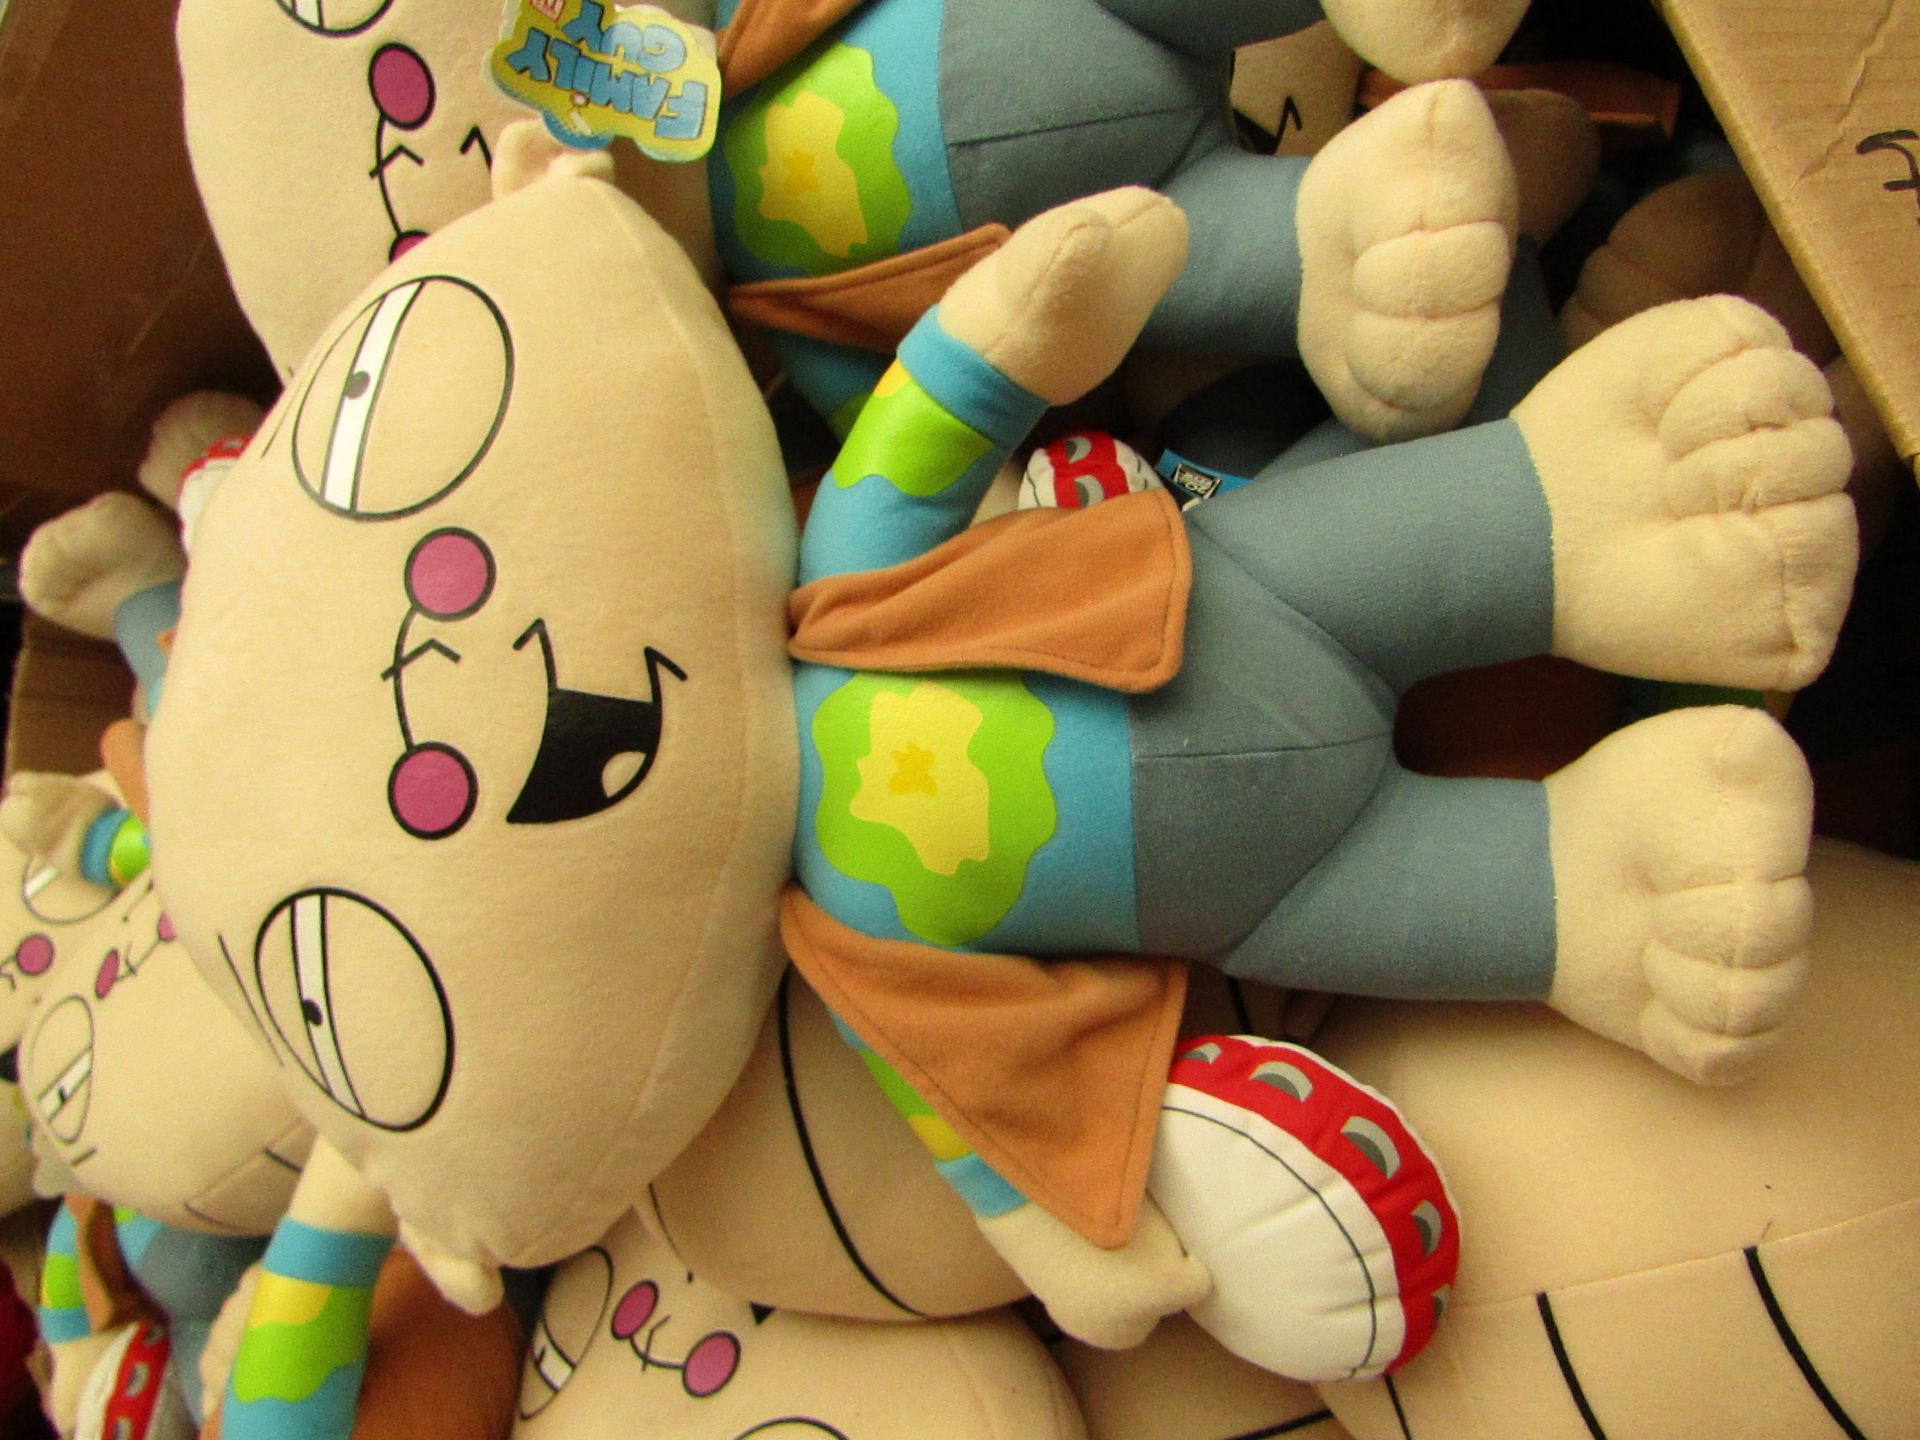 Family Guy Stewie 54cm teddy. See Image For Design. Unused with Tags